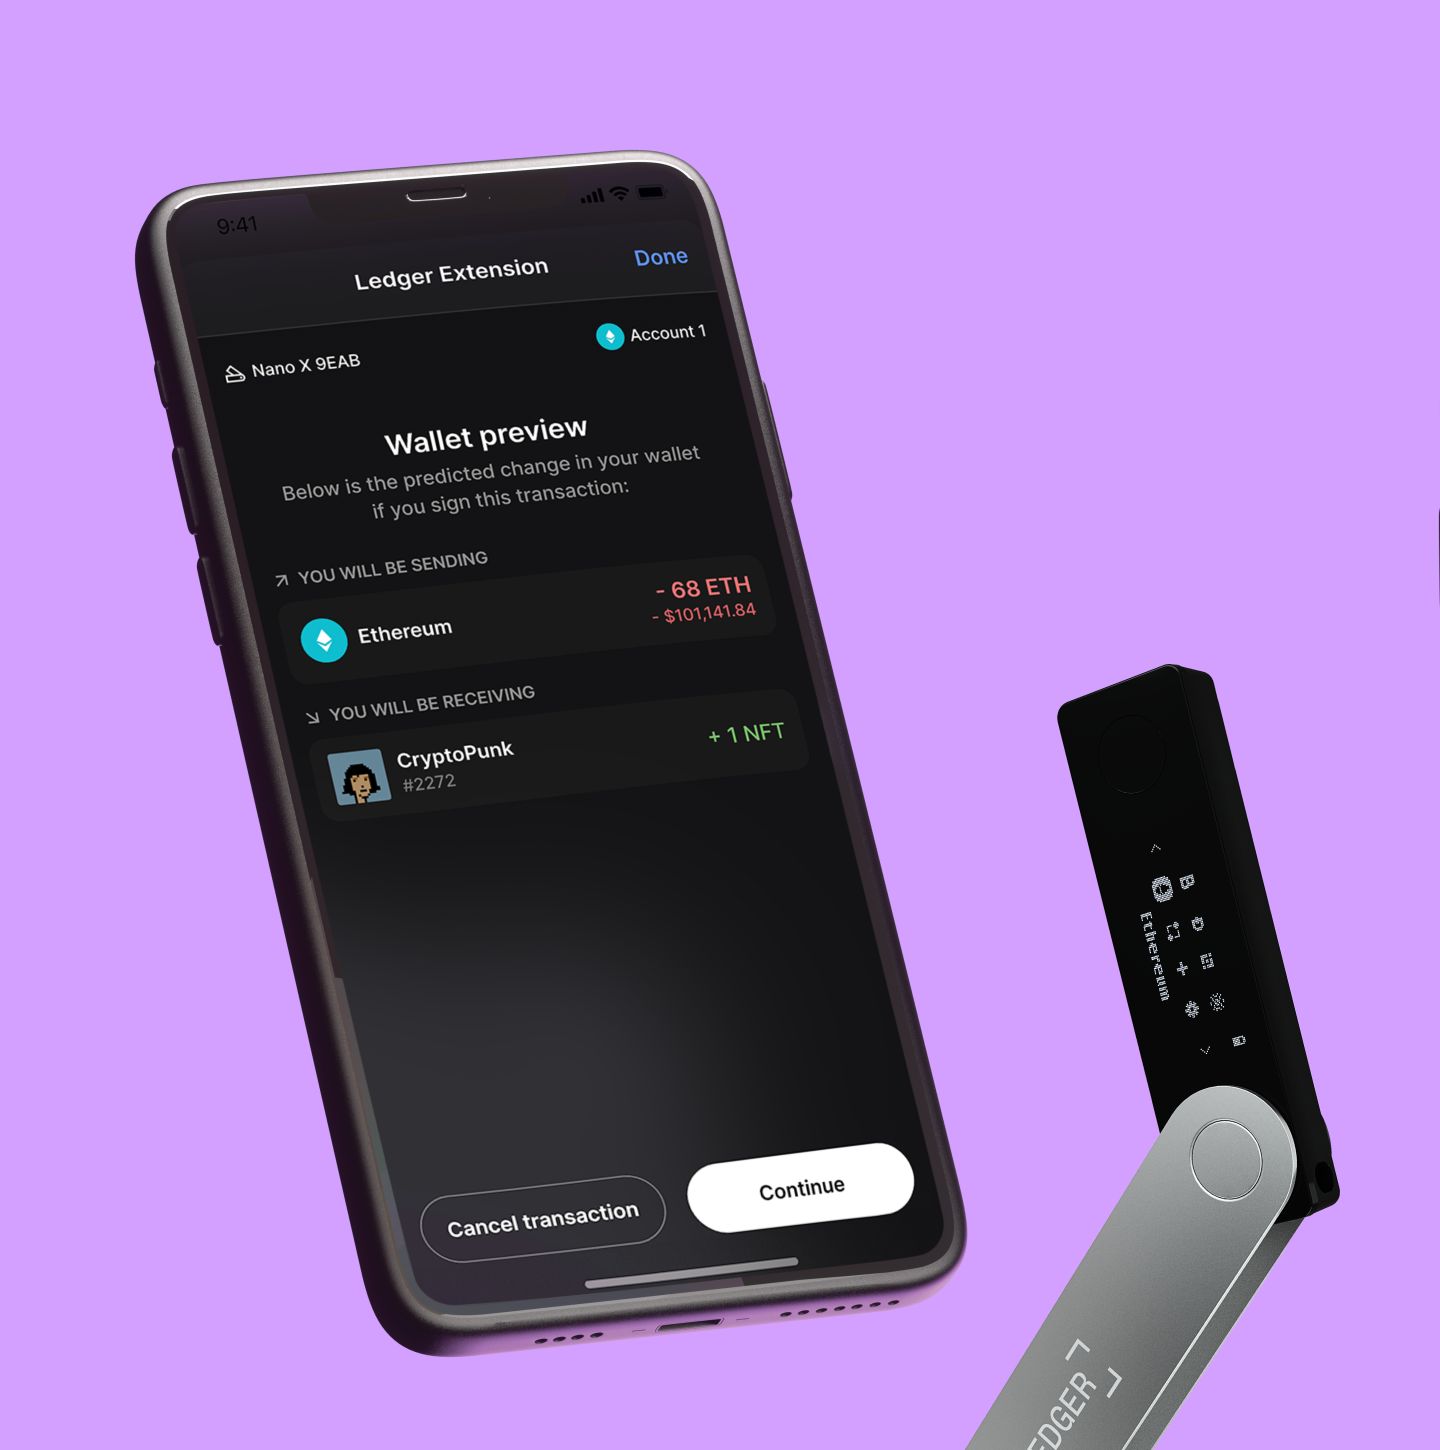 Ledger Hello - Official app in the Microsoft Store